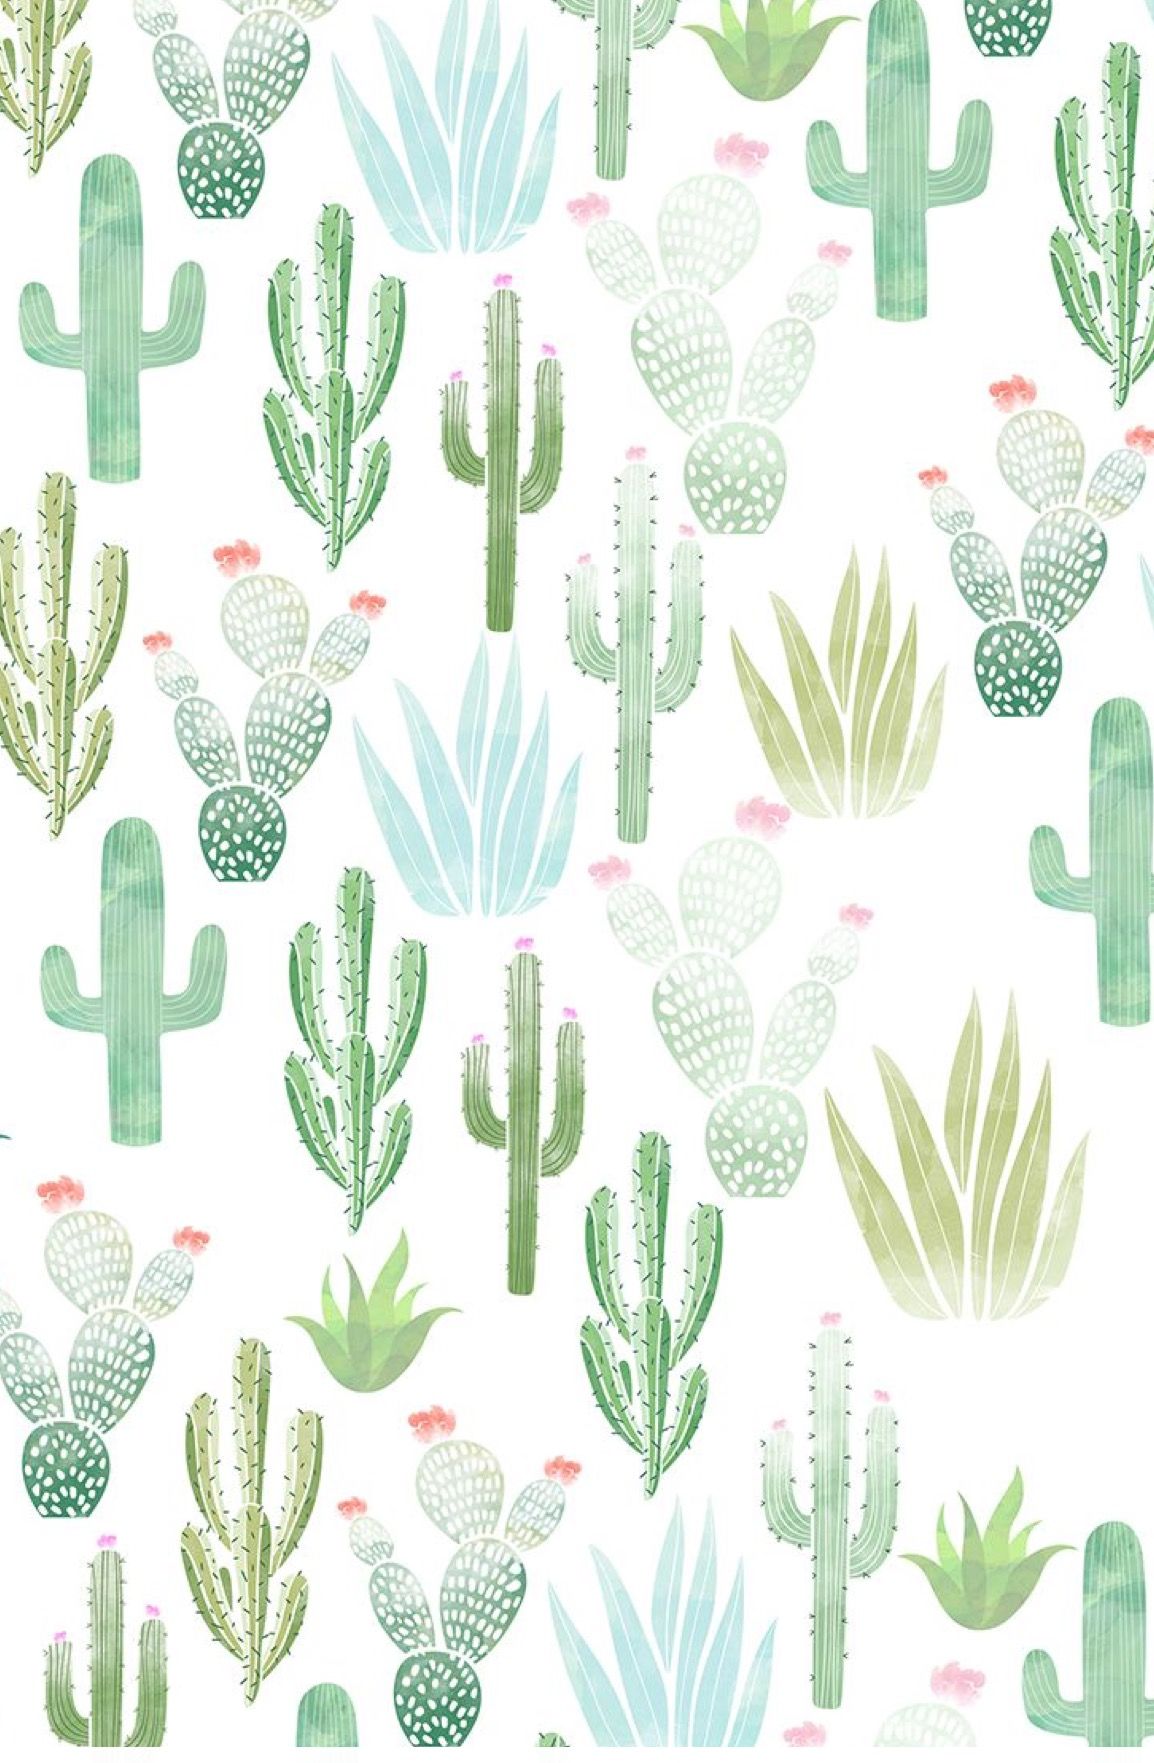 Cactus Background Wallpaper - NawPic